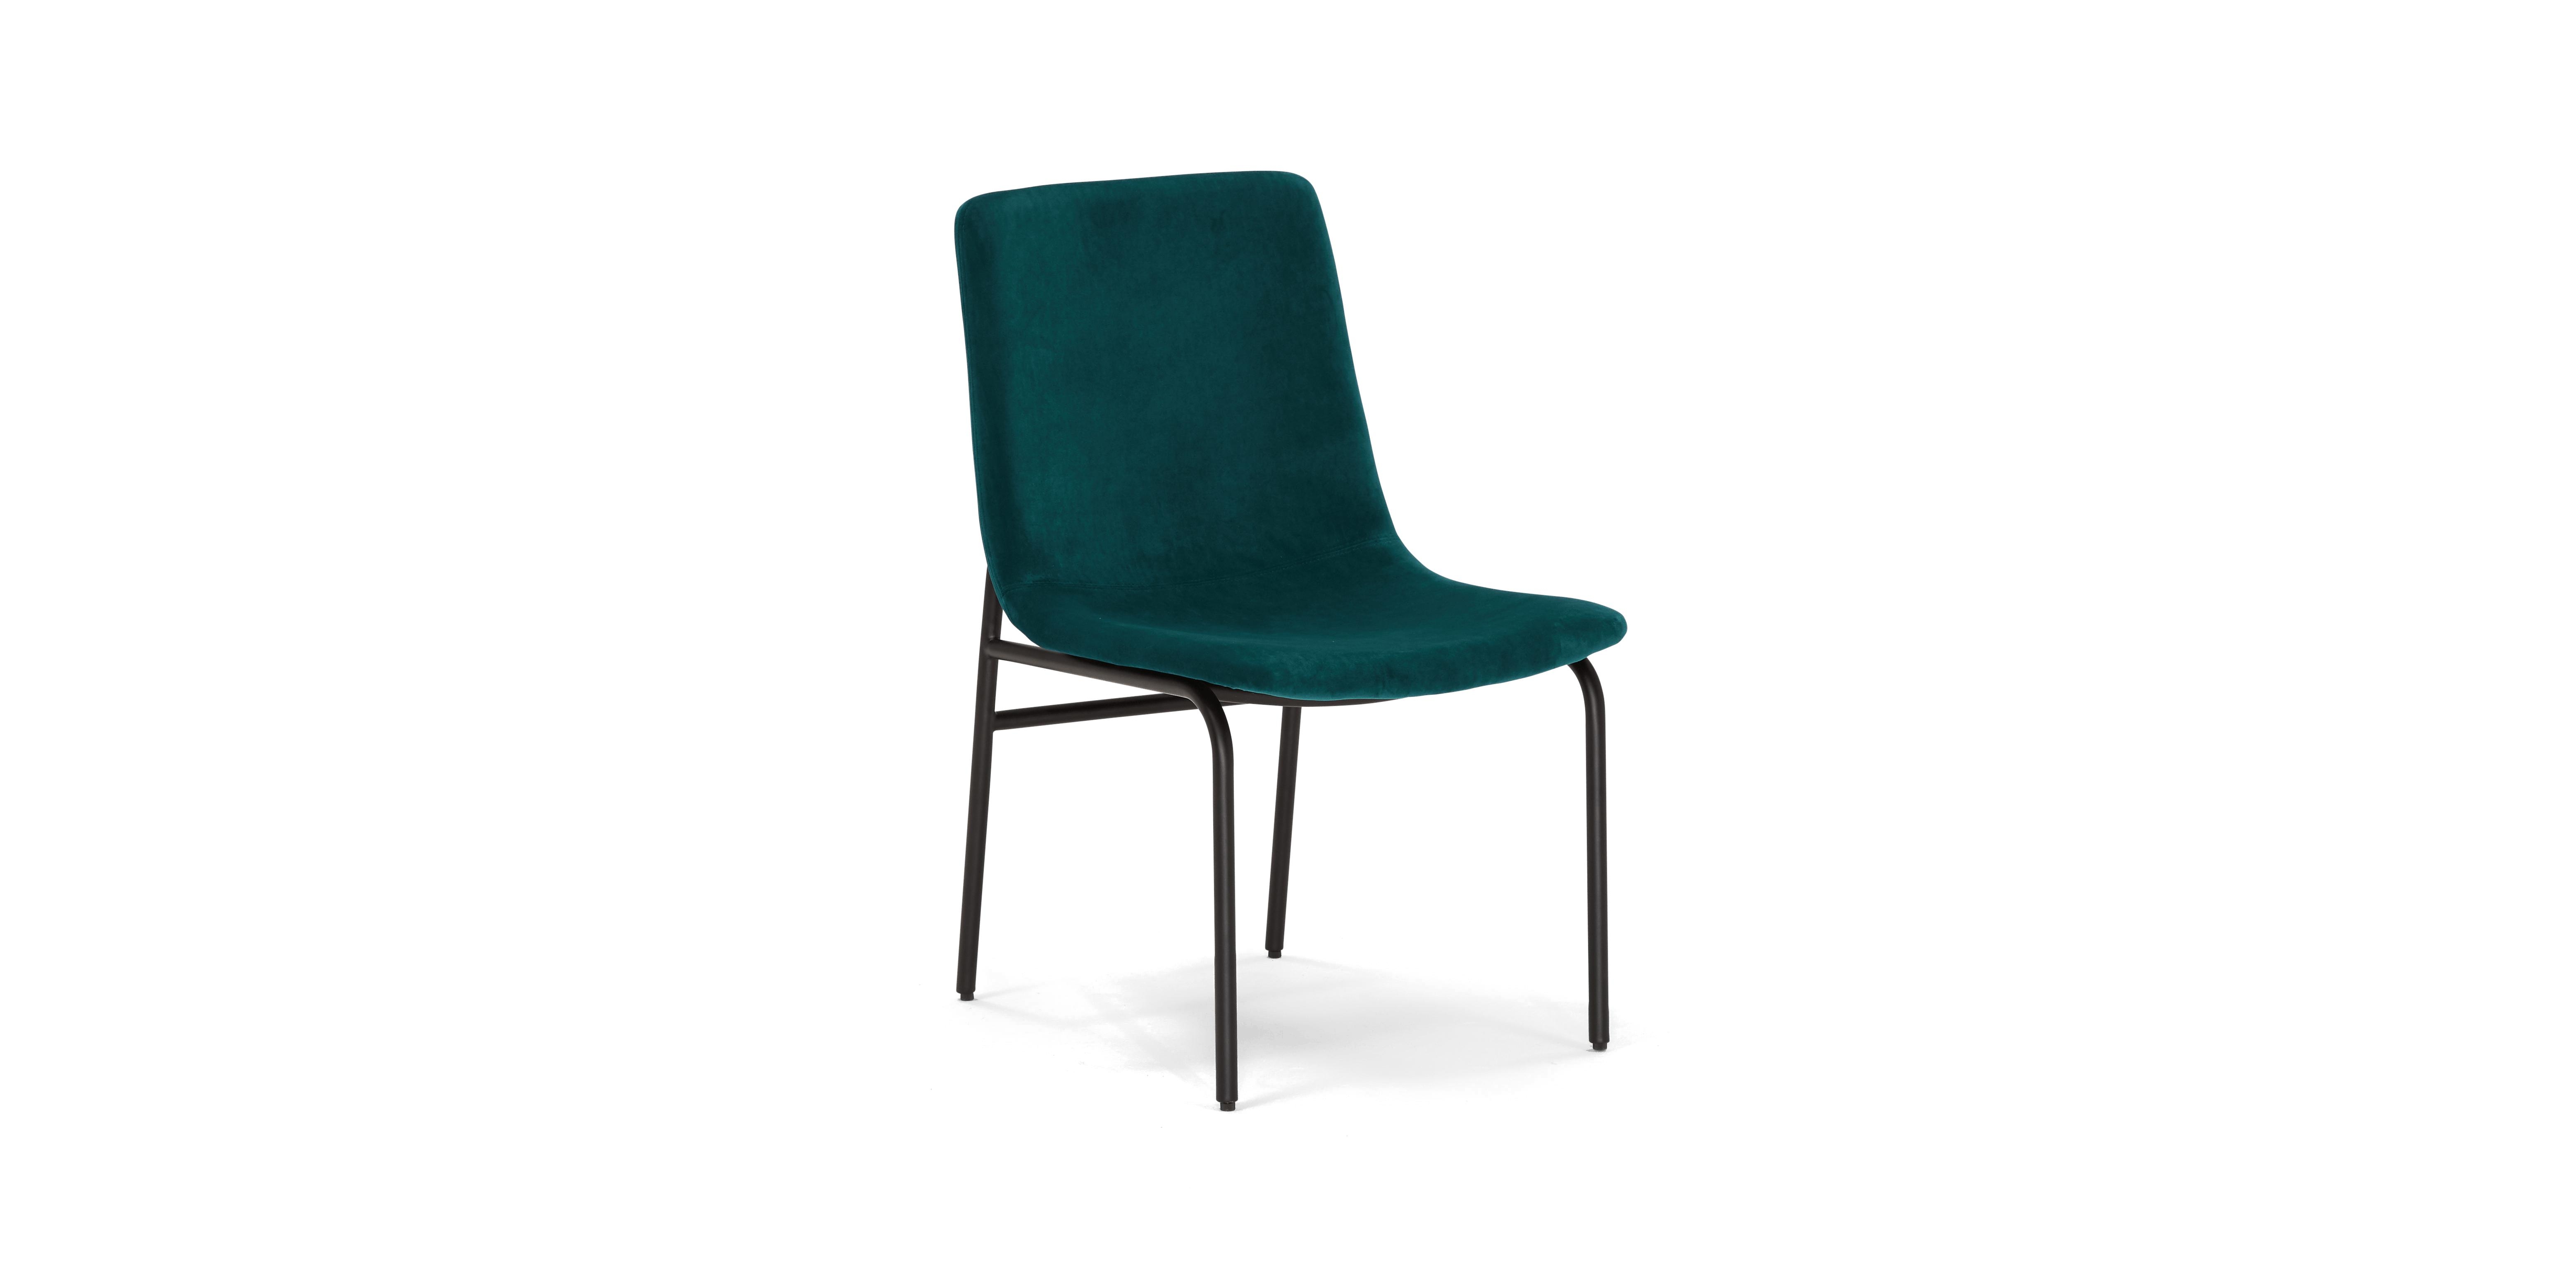 Blue Rae Mid Century Modern Dining Side Chair (Set of 2) - Royale Peacock - Image 1